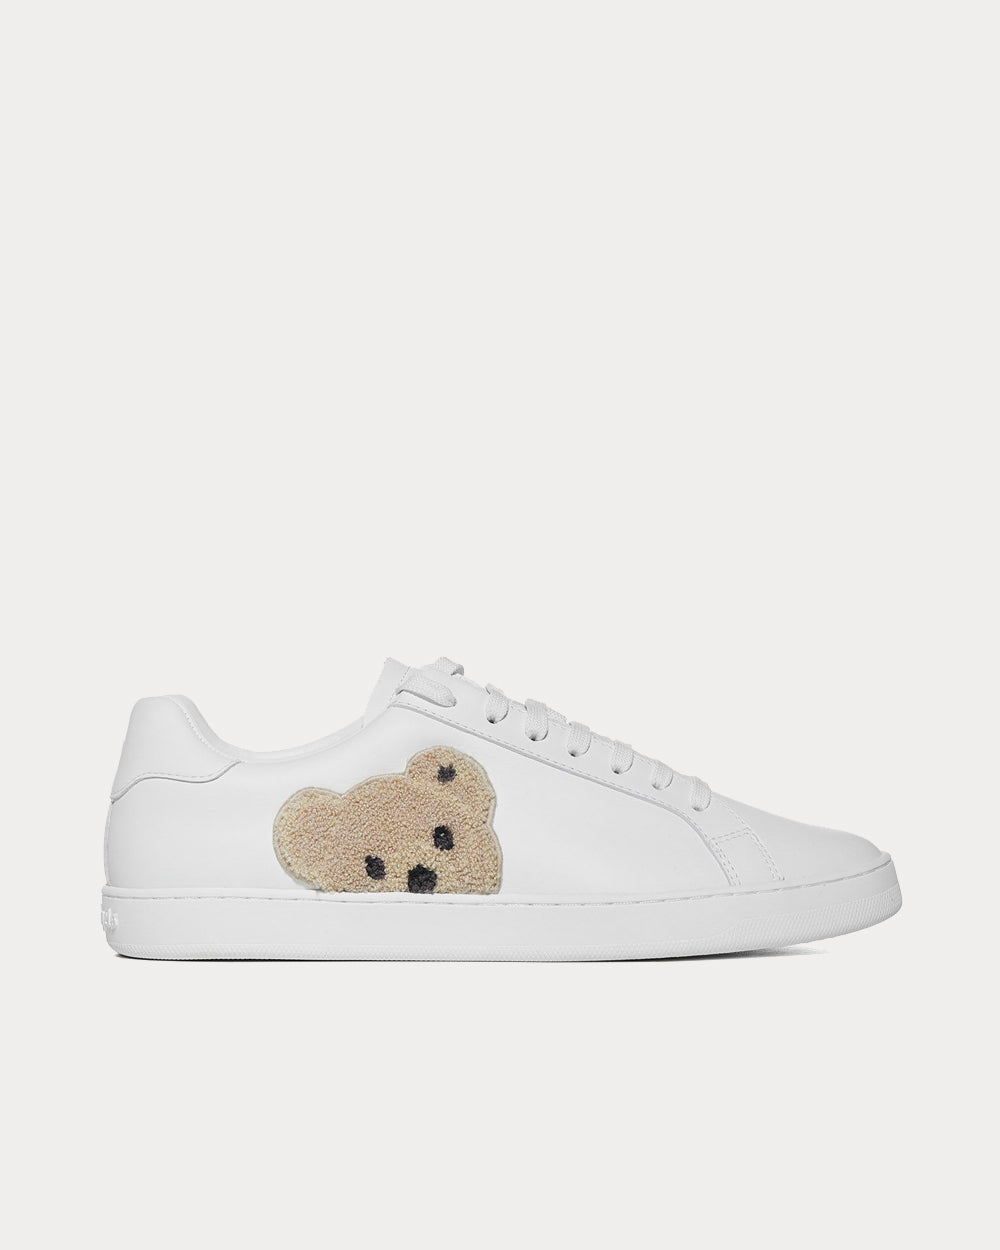 Palm Angels - Teddy Bear White / Brown Low Top Sneakers